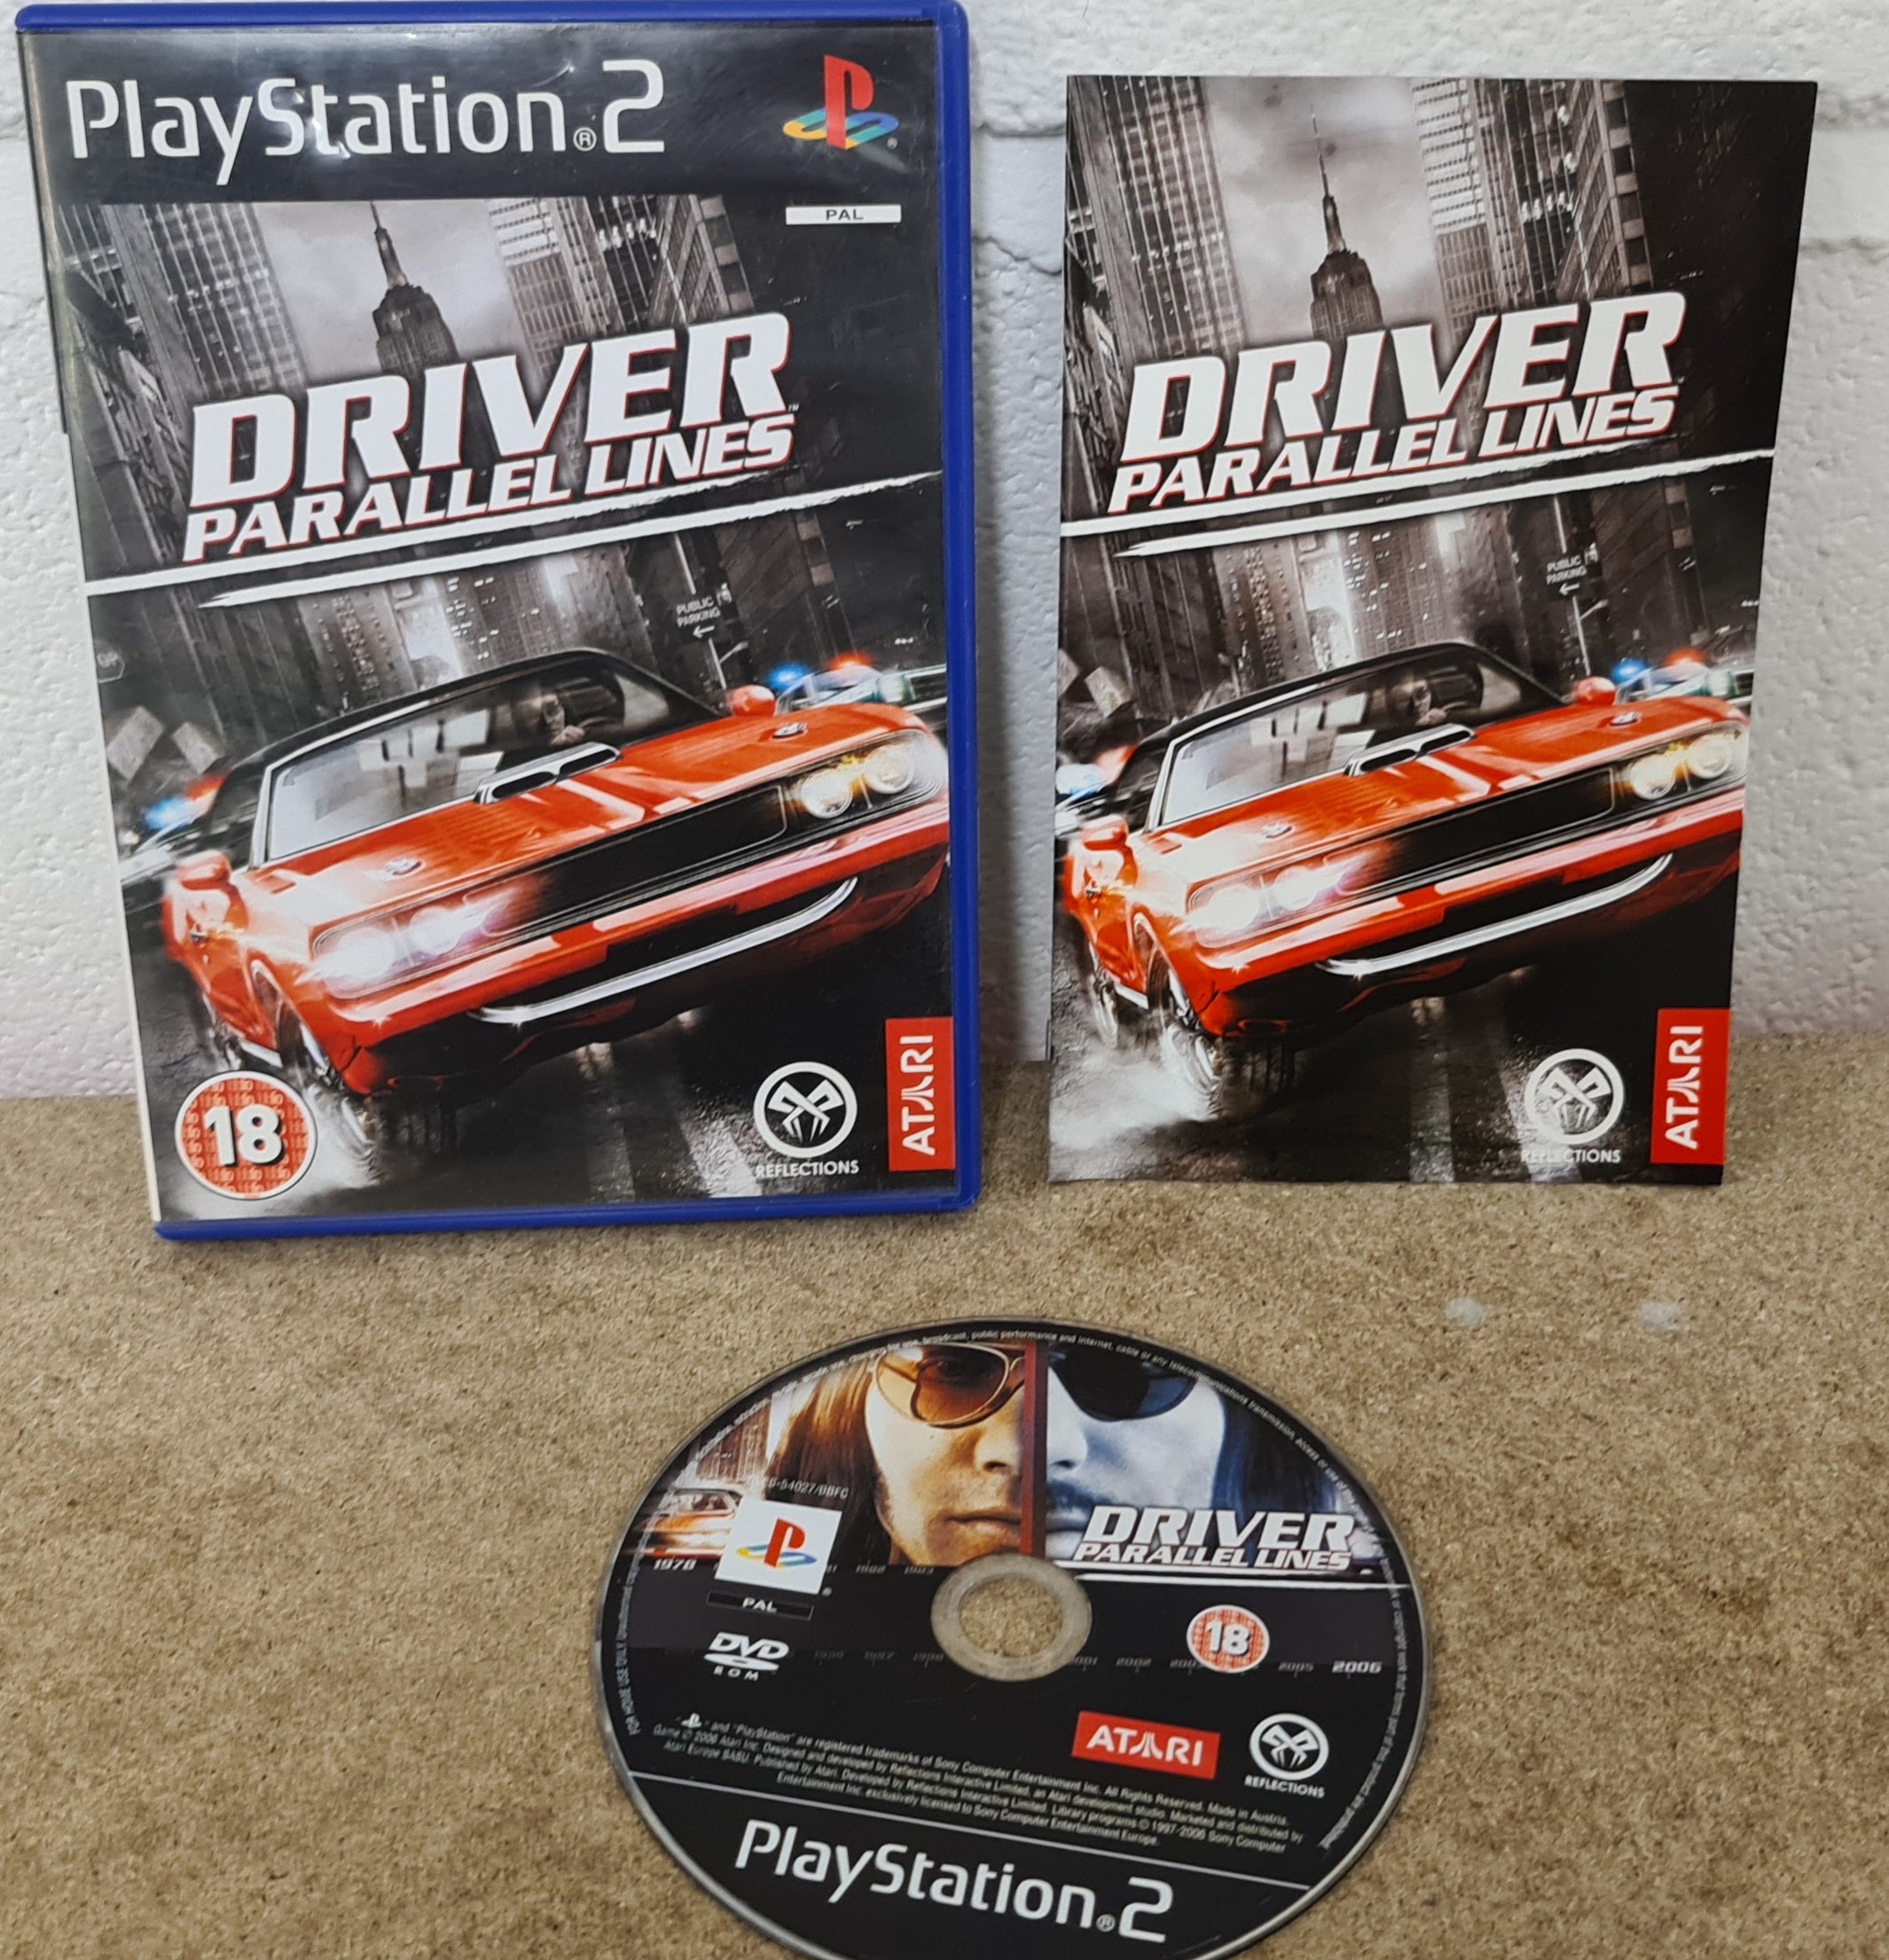 Driver Parallel Lines Sony Playstation 2 (PS2) Game – Retro Gamer Heaven